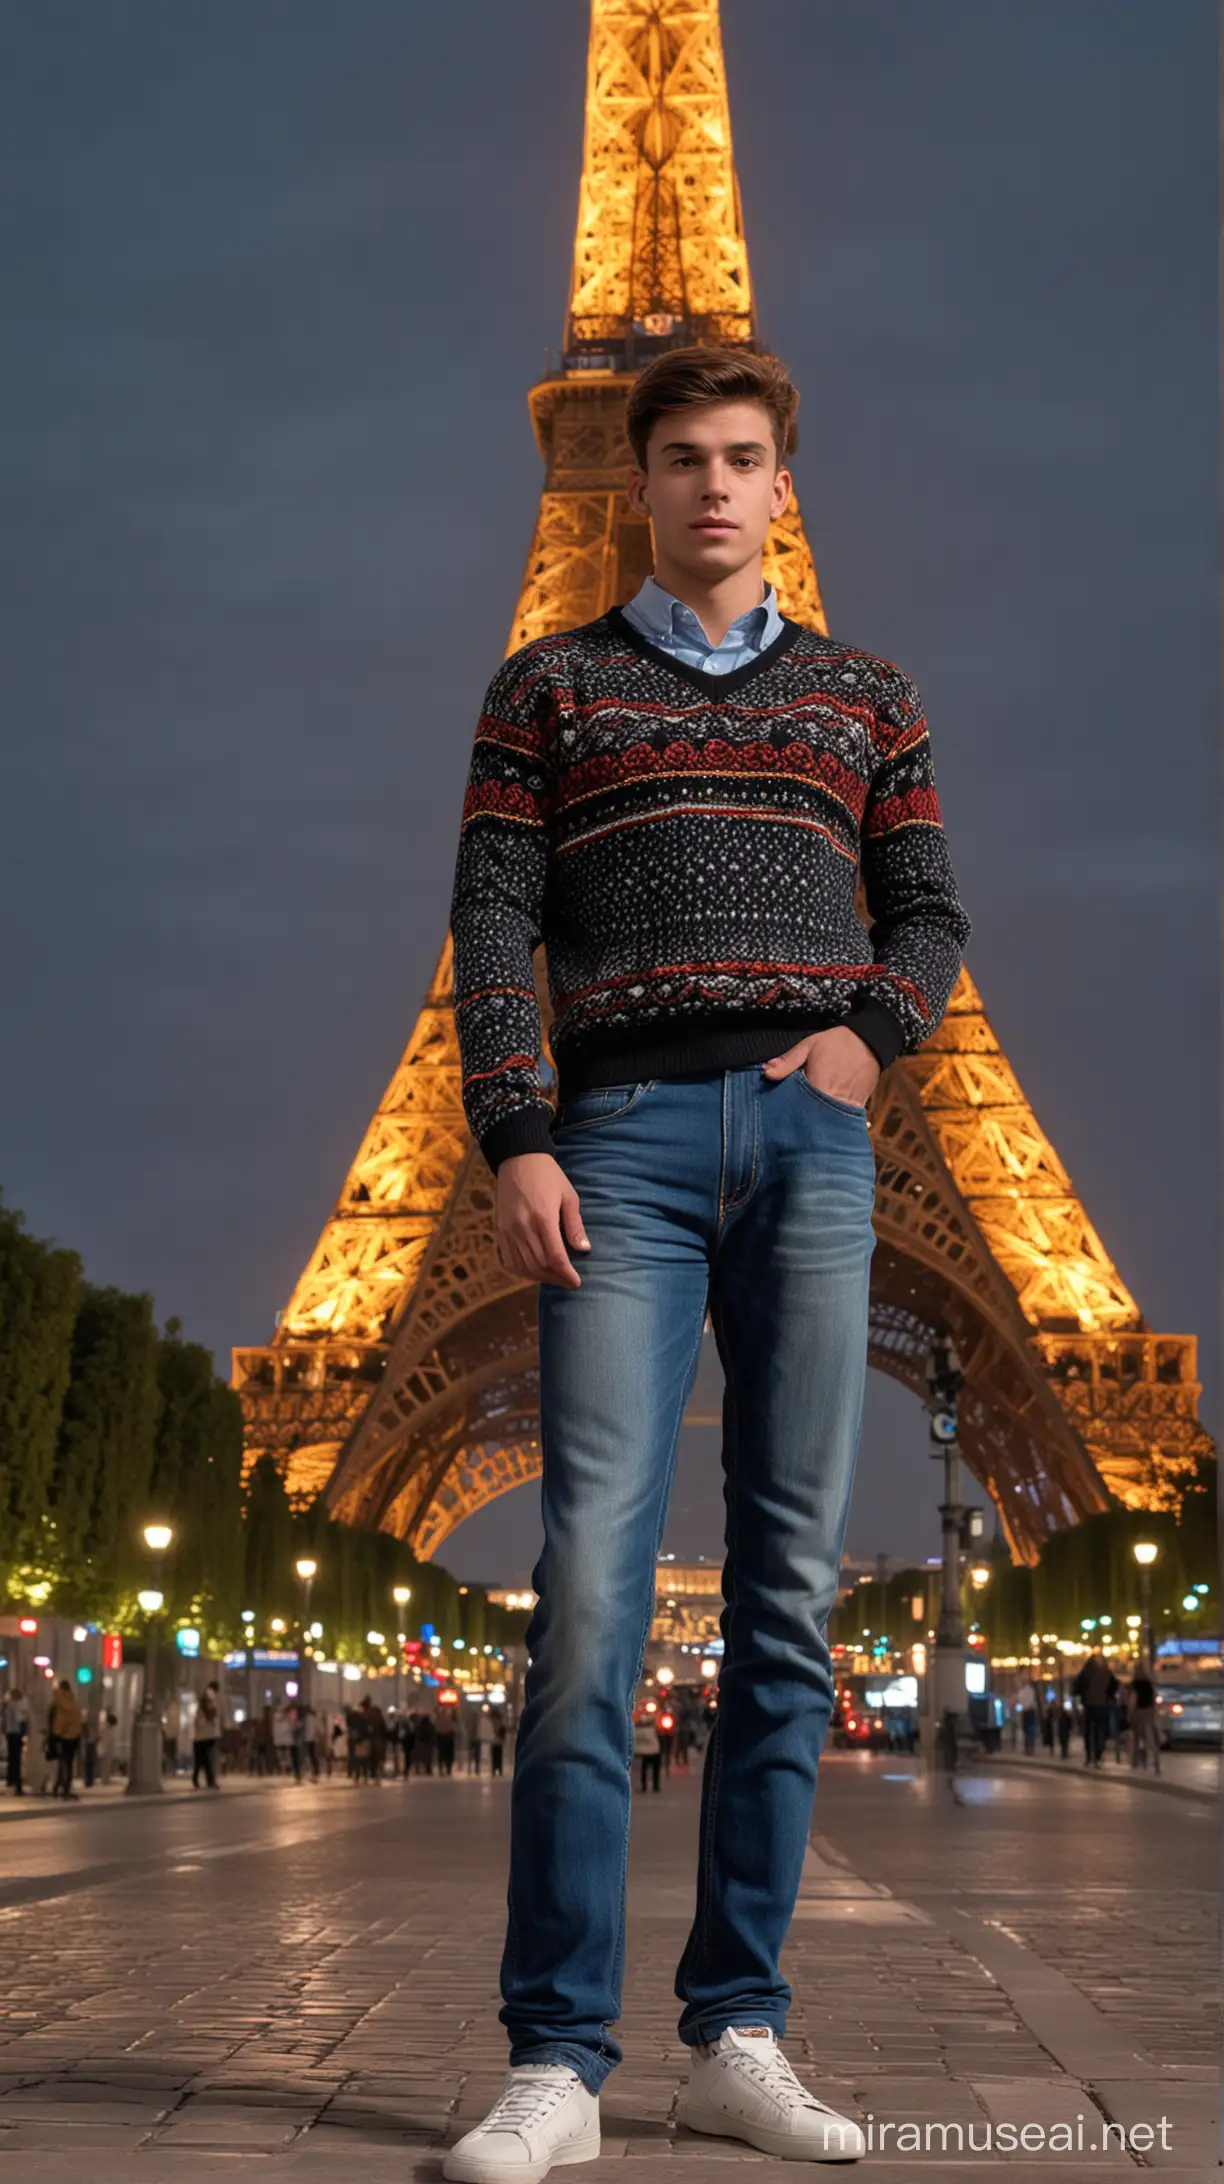 Handsome 18YearOld Man in Sweater and Jeans Poses Under Eiffel Tower at Dusk